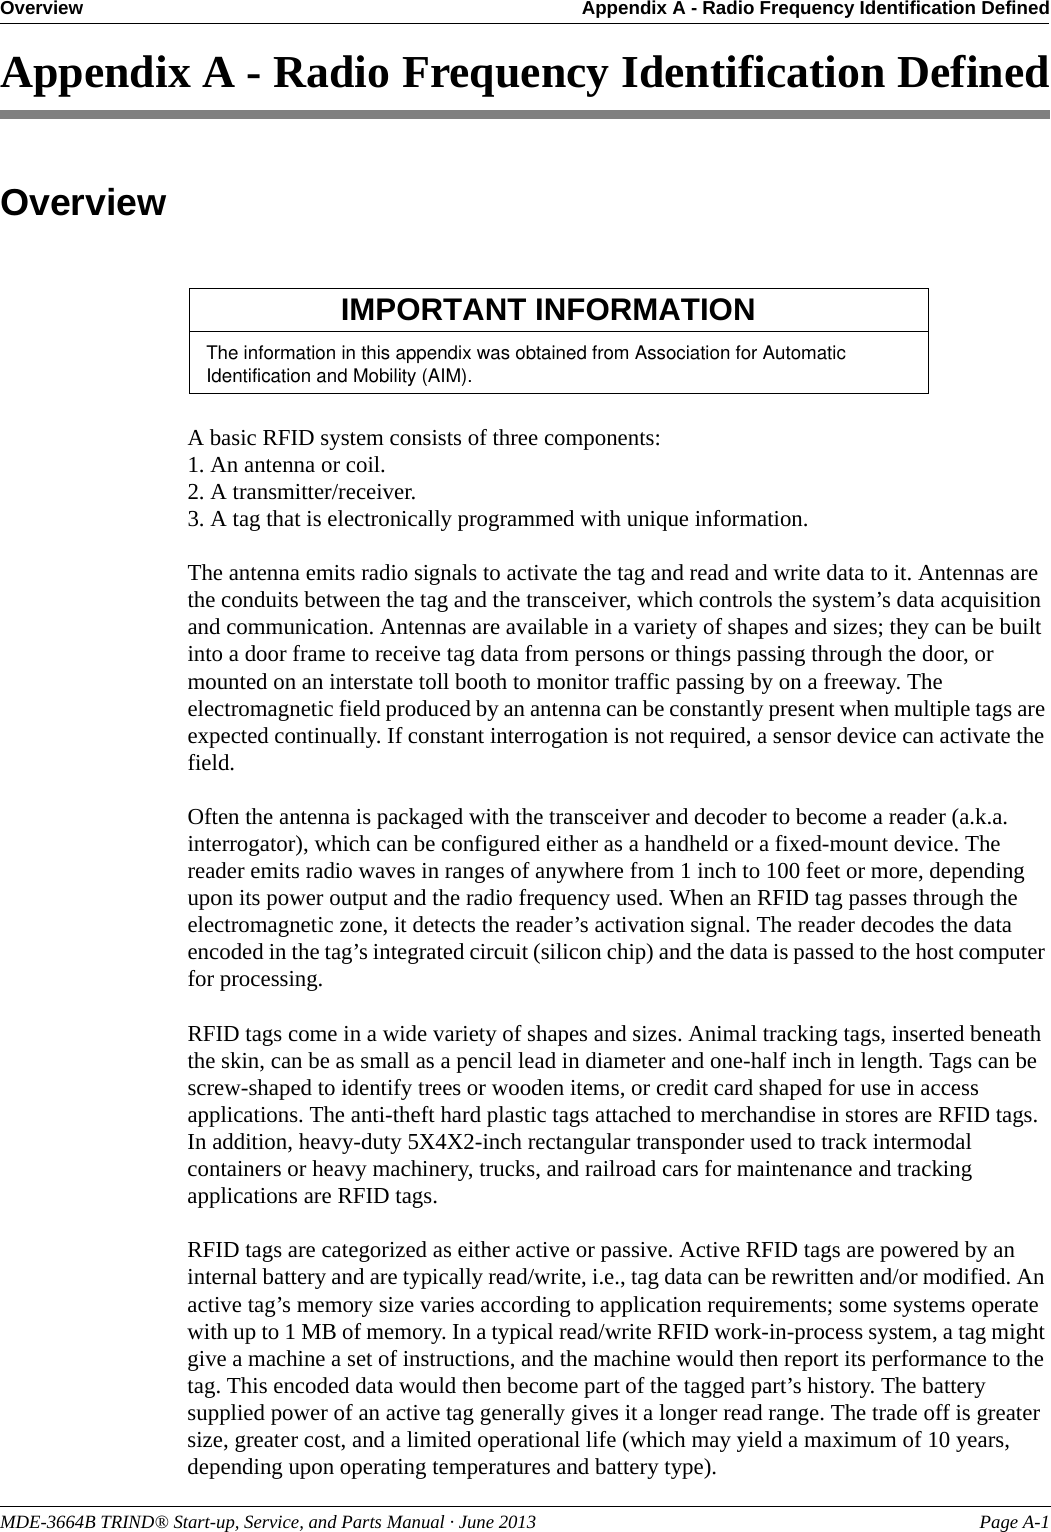 MDE-3664B TRIND® Start-up, Service, and Parts Manual · June 2013 Page A-1Overview Appendix A - Radio Frequency Identification DefinedAppendix A - Radio Frequency Identification DefinedOverviewThe information in this appendix was obtained from Association for Automatic Identification and Mobility (AIM).IMPORTANT INFORMATIONA basic RFID system consists of three components: 1. An antenna or coil.2. A transmitter/receiver.3. A tag that is electronically programmed with unique information.The antenna emits radio signals to activate the tag and read and write data to it. Antennas are the conduits between the tag and the transceiver, which controls the system’s data acquisition and communication. Antennas are available in a variety of shapes and sizes; they can be built into a door frame to receive tag data from persons or things passing through the door, or mounted on an interstate toll booth to monitor traffic passing by on a freeway. The electromagnetic field produced by an antenna can be constantly present when multiple tags are expected continually. If constant interrogation is not required, a sensor device can activate the field. Often the antenna is packaged with the transceiver and decoder to become a reader (a.k.a. interrogator), which can be configured either as a handheld or a fixed-mount device. The reader emits radio waves in ranges of anywhere from 1 inch to 100 feet or more, depending upon its power output and the radio frequency used. When an RFID tag passes through the electromagnetic zone, it detects the reader’s activation signal. The reader decodes the data encoded in the tag’s integrated circuit (silicon chip) and the data is passed to the host computer for processing.RFID tags come in a wide variety of shapes and sizes. Animal tracking tags, inserted beneath the skin, can be as small as a pencil lead in diameter and one-half inch in length. Tags can be screw-shaped to identify trees or wooden items, or credit card shaped for use in access applications. The anti-theft hard plastic tags attached to merchandise in stores are RFID tags. In addition, heavy-duty 5X4X2-inch rectangular transponder used to track intermodal containers or heavy machinery, trucks, and railroad cars for maintenance and tracking applications are RFID tags.RFID tags are categorized as either active or passive. Active RFID tags are powered by an internal battery and are typically read/write, i.e., tag data can be rewritten and/or modified. An active tag’s memory size varies according to application requirements; some systems operate with up to 1 MB of memory. In a typical read/write RFID work-in-process system, a tag might give a machine a set of instructions, and the machine would then report its performance to the tag. This encoded data would then become part of the tagged part’s history. The battery supplied power of an active tag generally gives it a longer read range. The trade off is greater size, greater cost, and a limited operational life (which may yield a maximum of 10 years, depending upon operating temperatures and battery type).